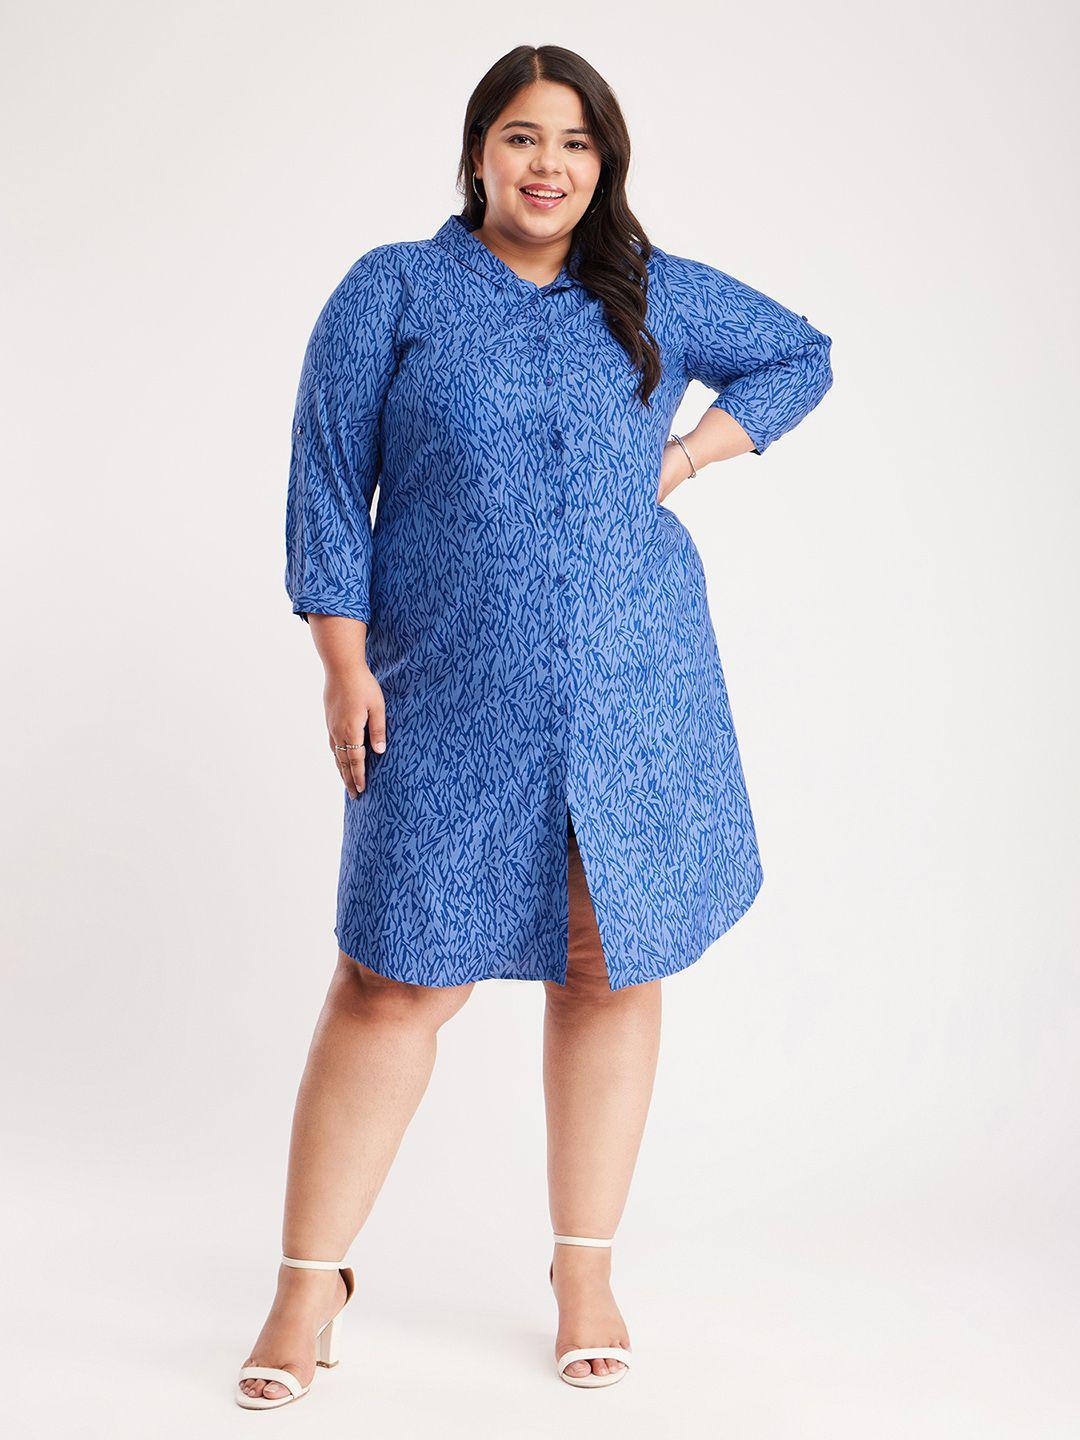 fablestreet x plus size abstract printed shirt dress